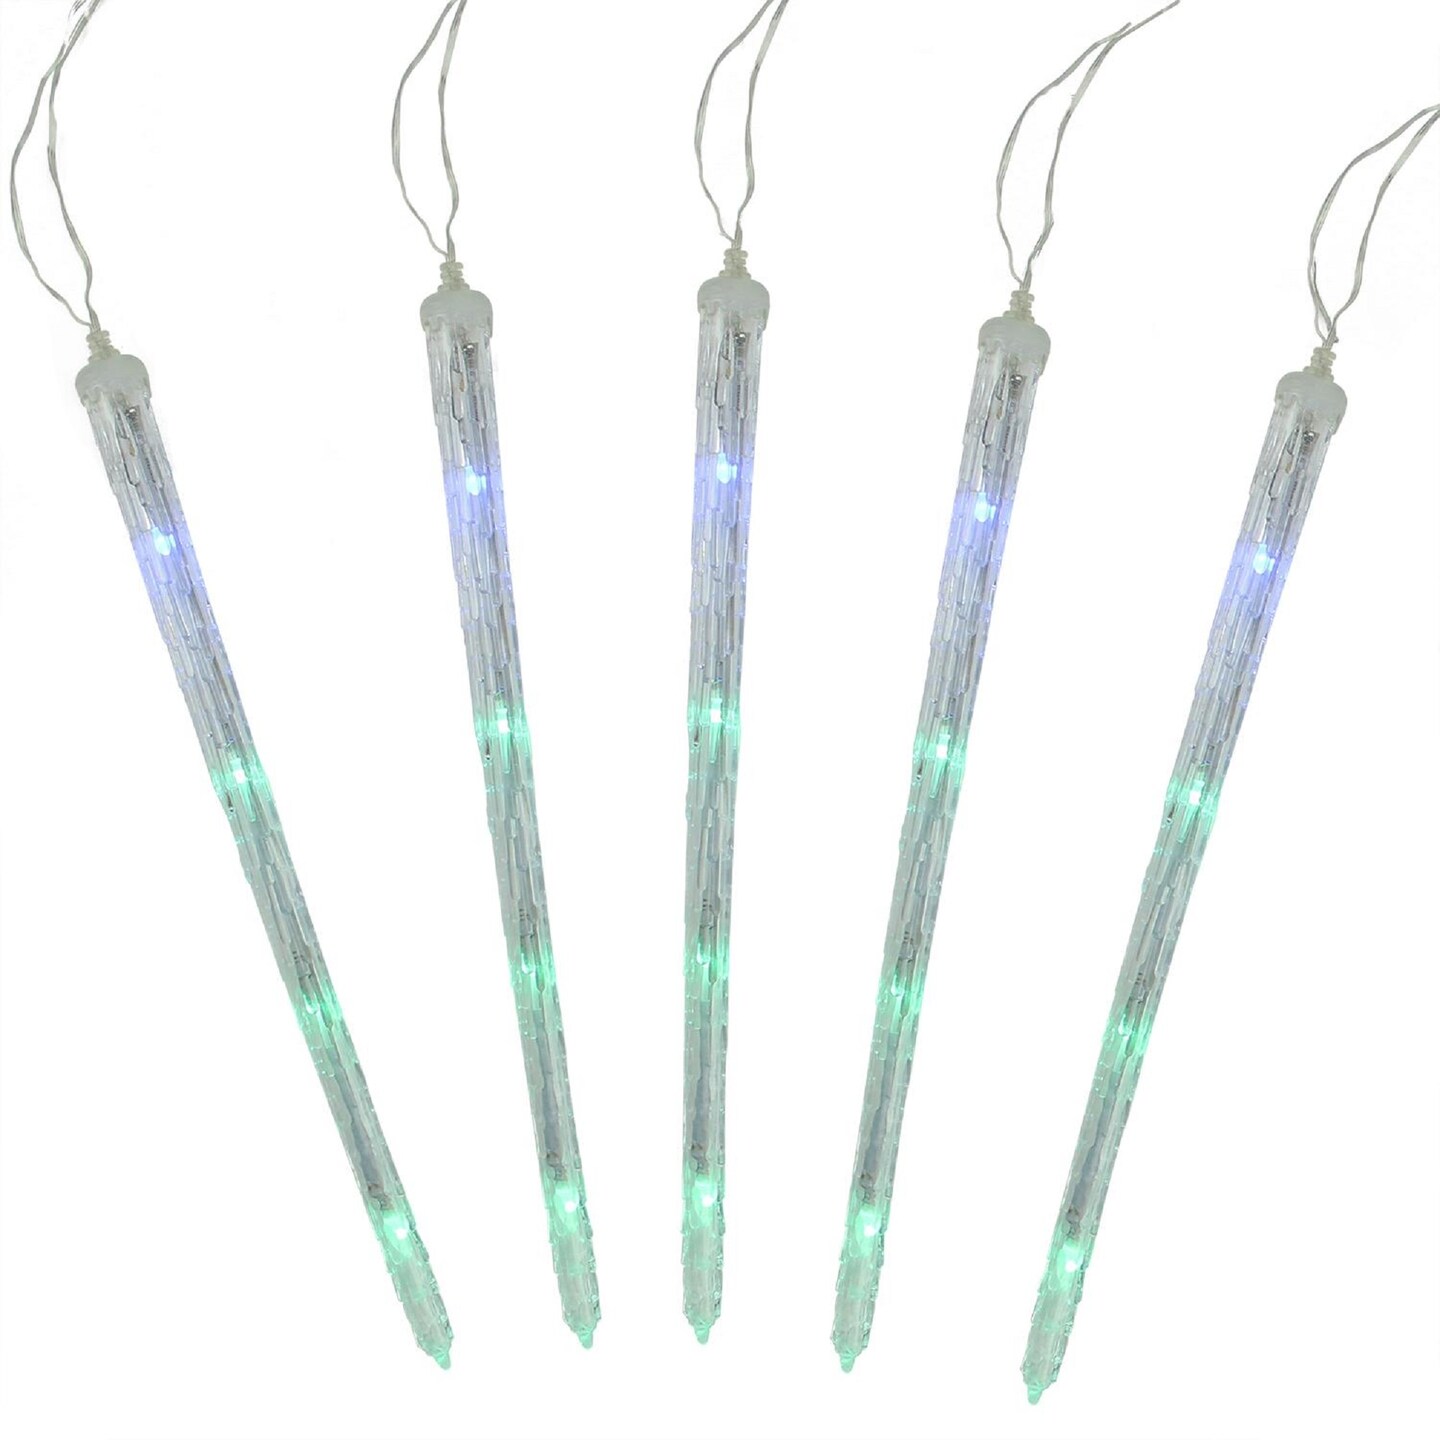 Northlight Set of 5 Color Changing Cascading Icicle Christmas Light Tubes - 13 ft Clear Wire